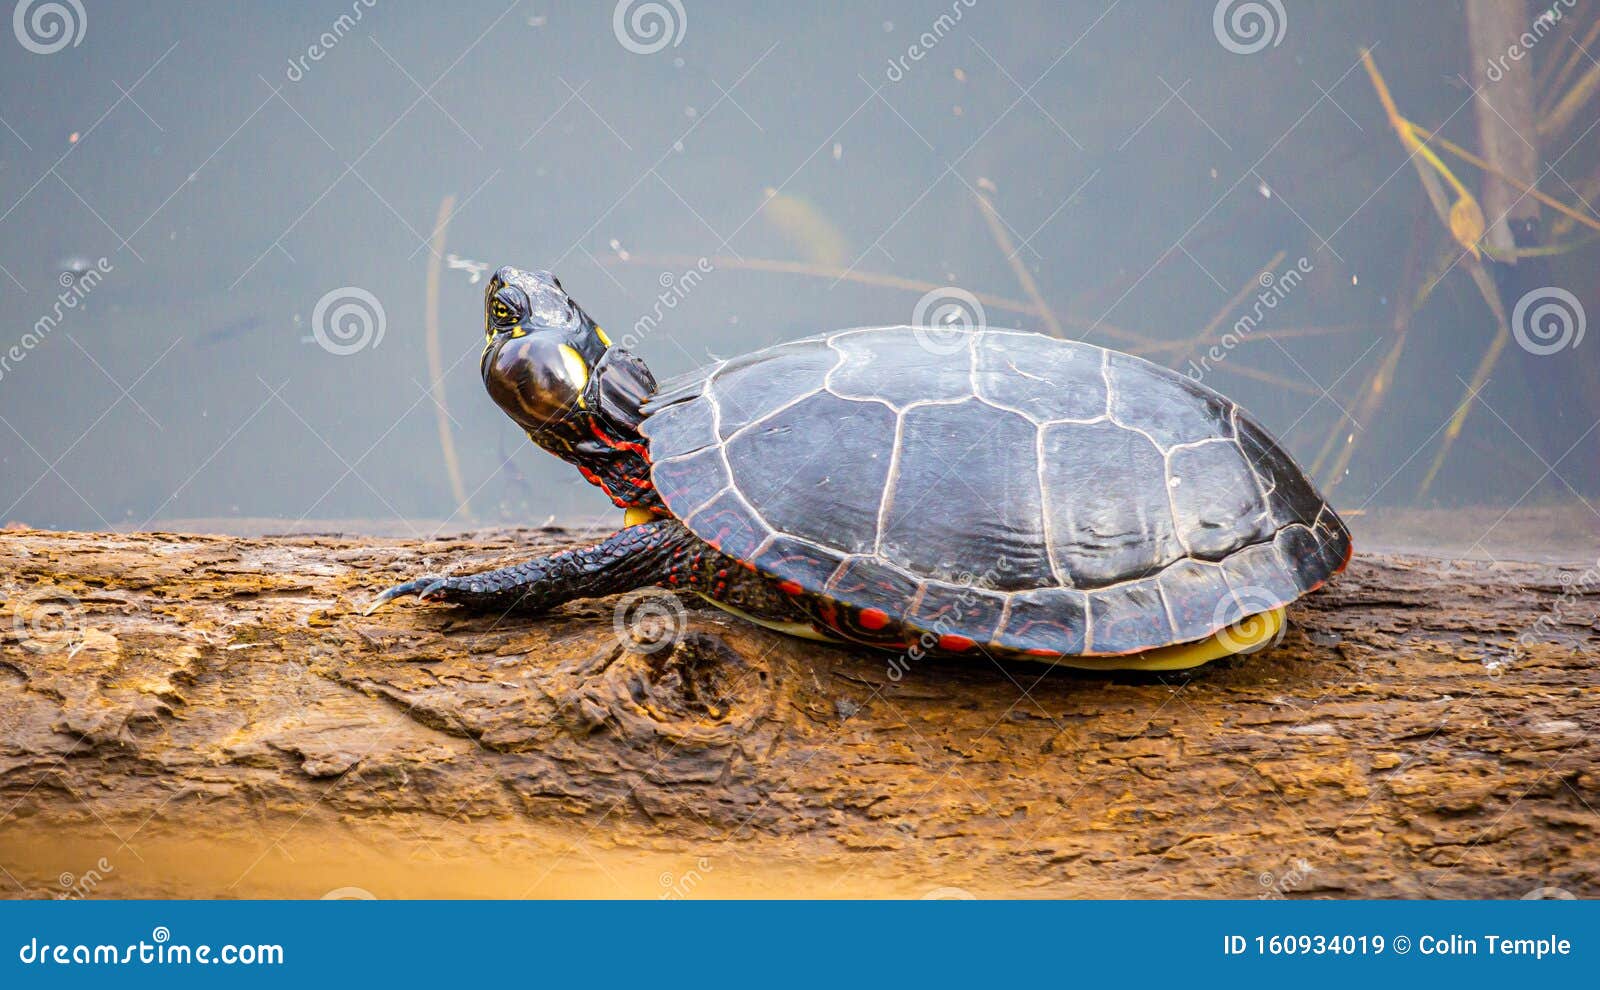 painted turtle on a log